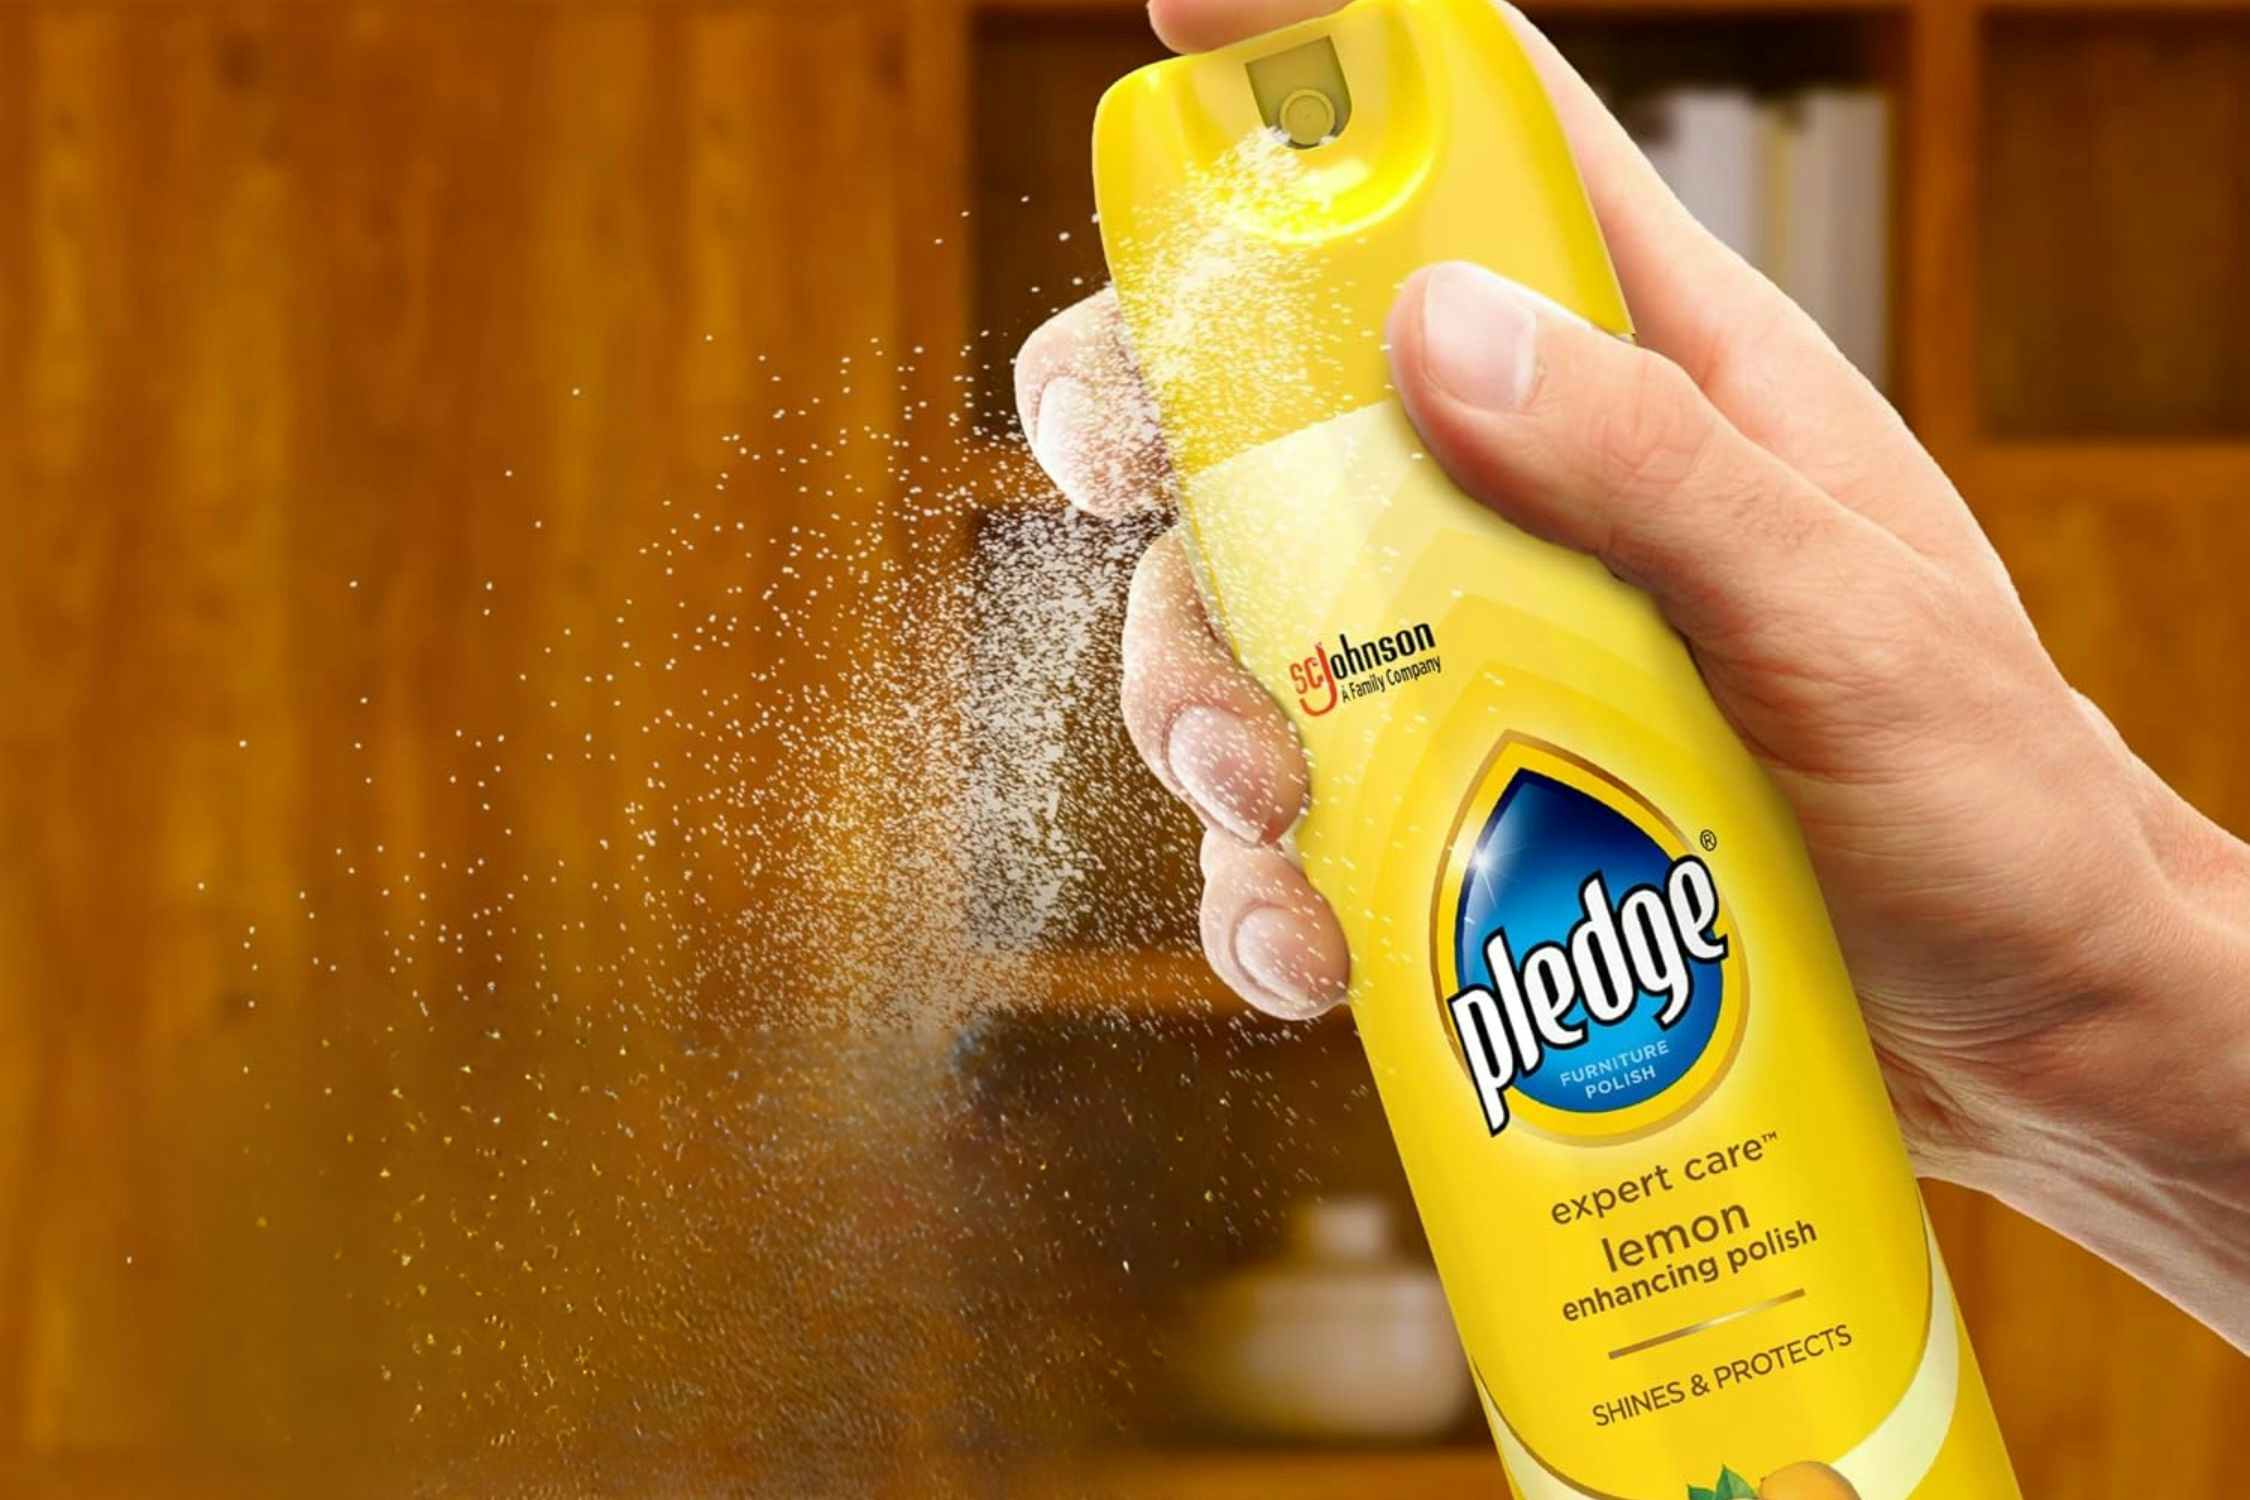 Pledge Wood Polish Spray: Get 2 Bottles for as Low as $6.46 on Amazon